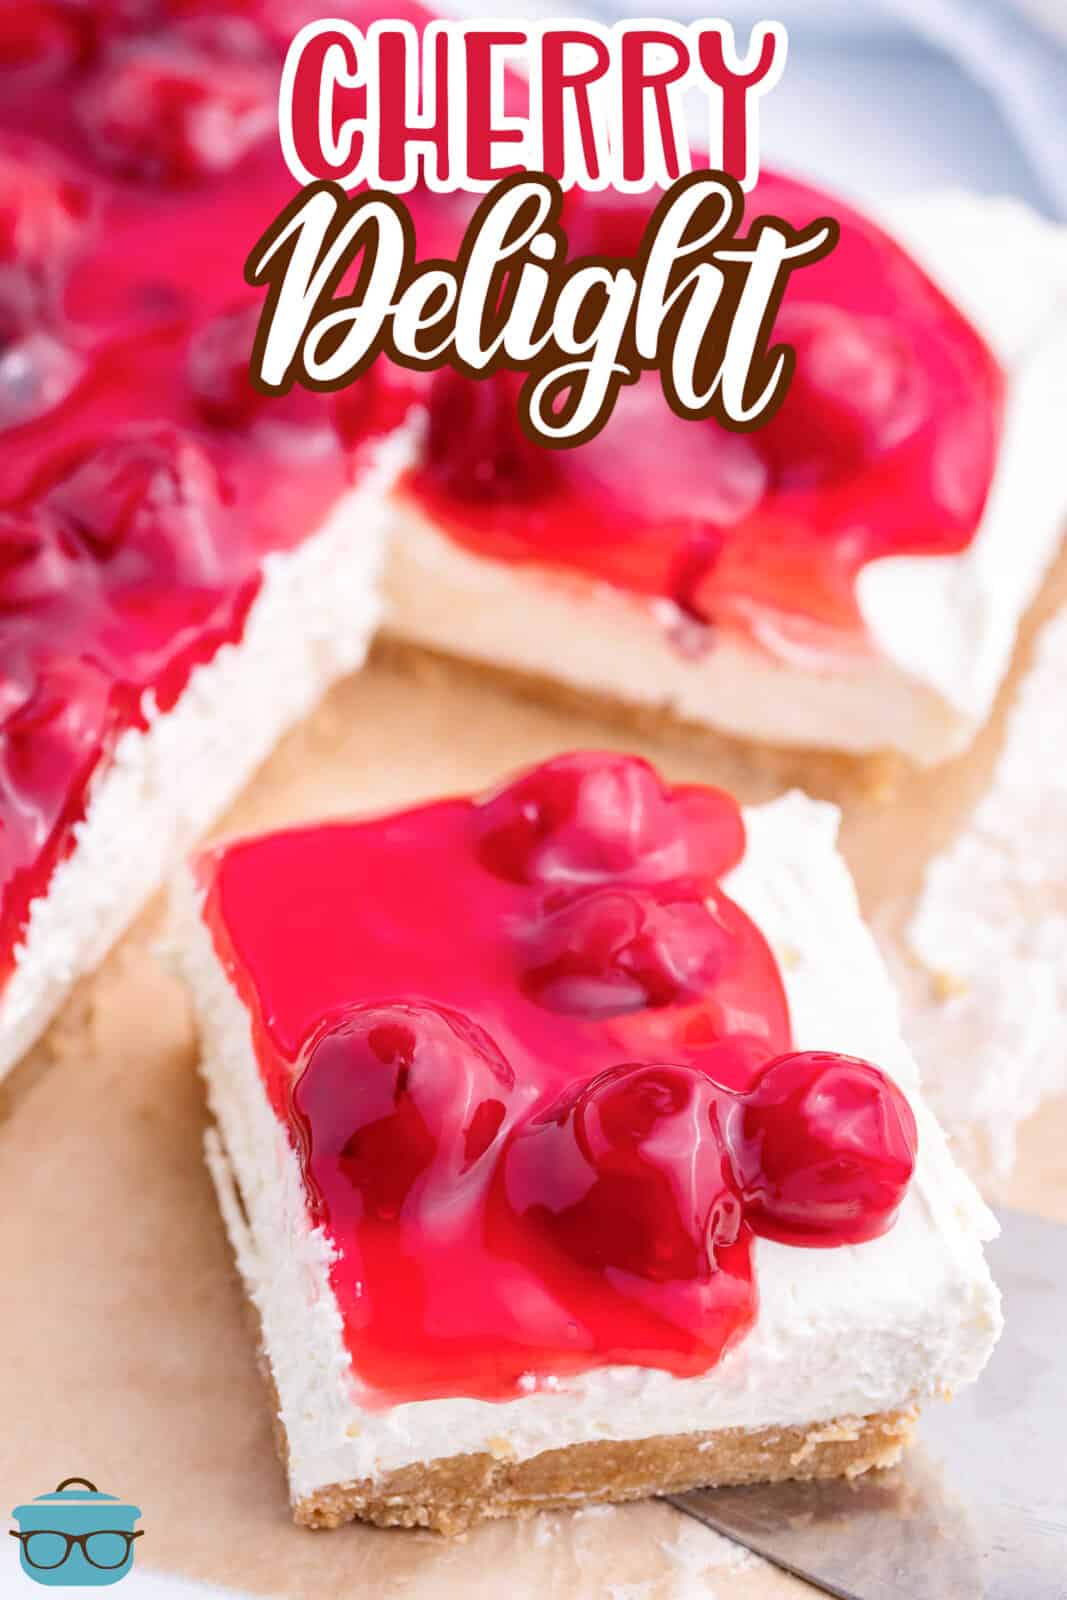 A slice of Cherry Delight pulled away from the rest of the dessert.